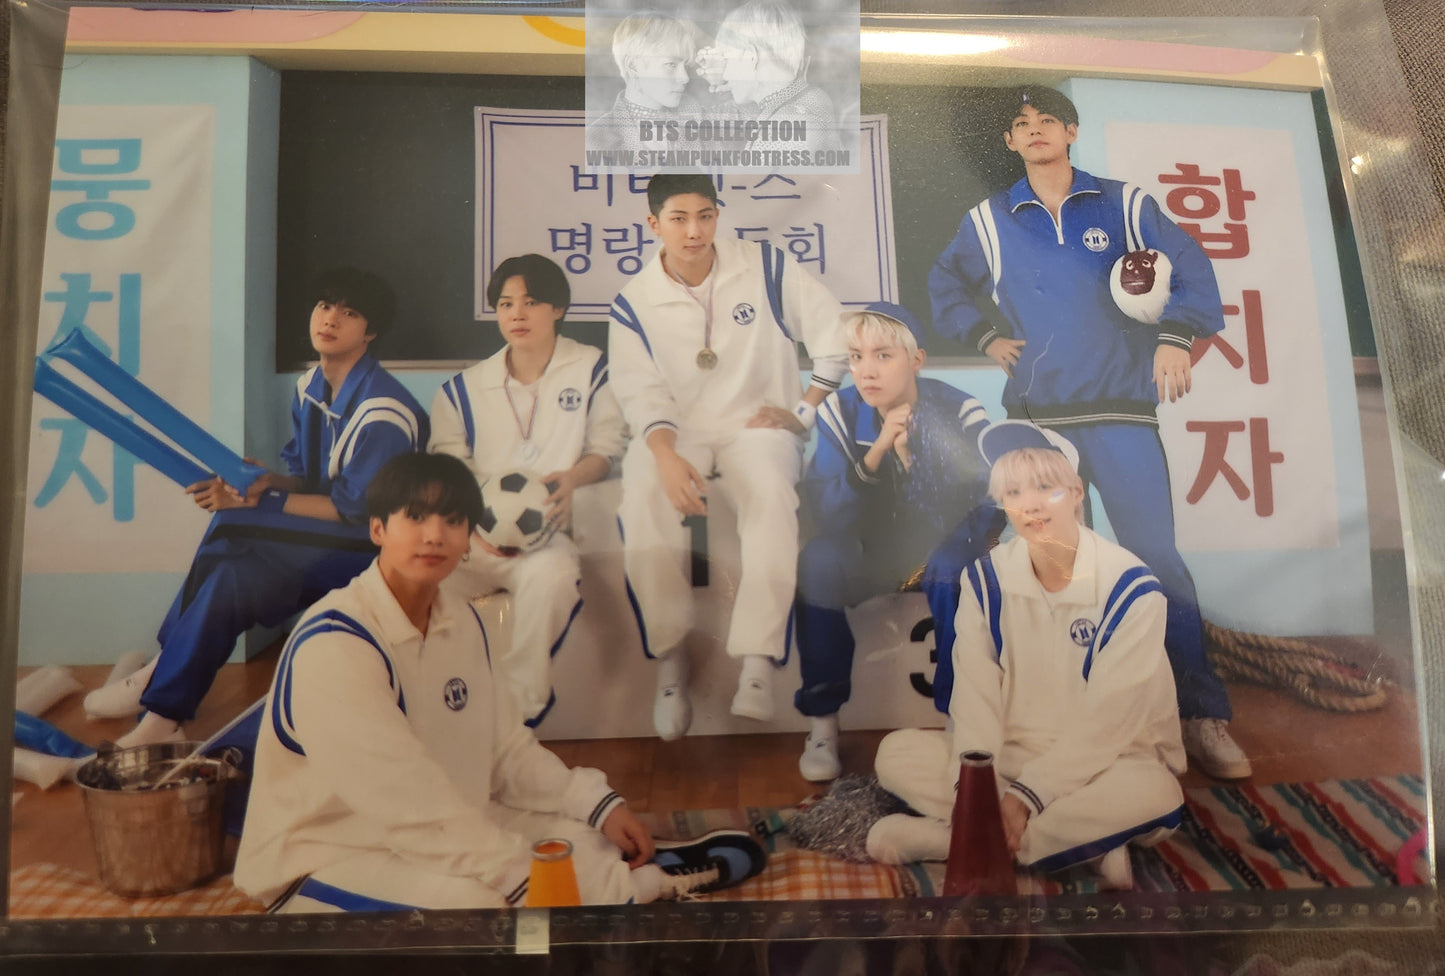 BTS US OURSELVES WE SPECIAL PHOTOFOLIO 4" X 6" SPORTY GROUP PHOTO JIN SUGA J-HOPE RM JIMIN V JUNGKOOK RELEASE NEW OFFICIAL MERCHANDISE